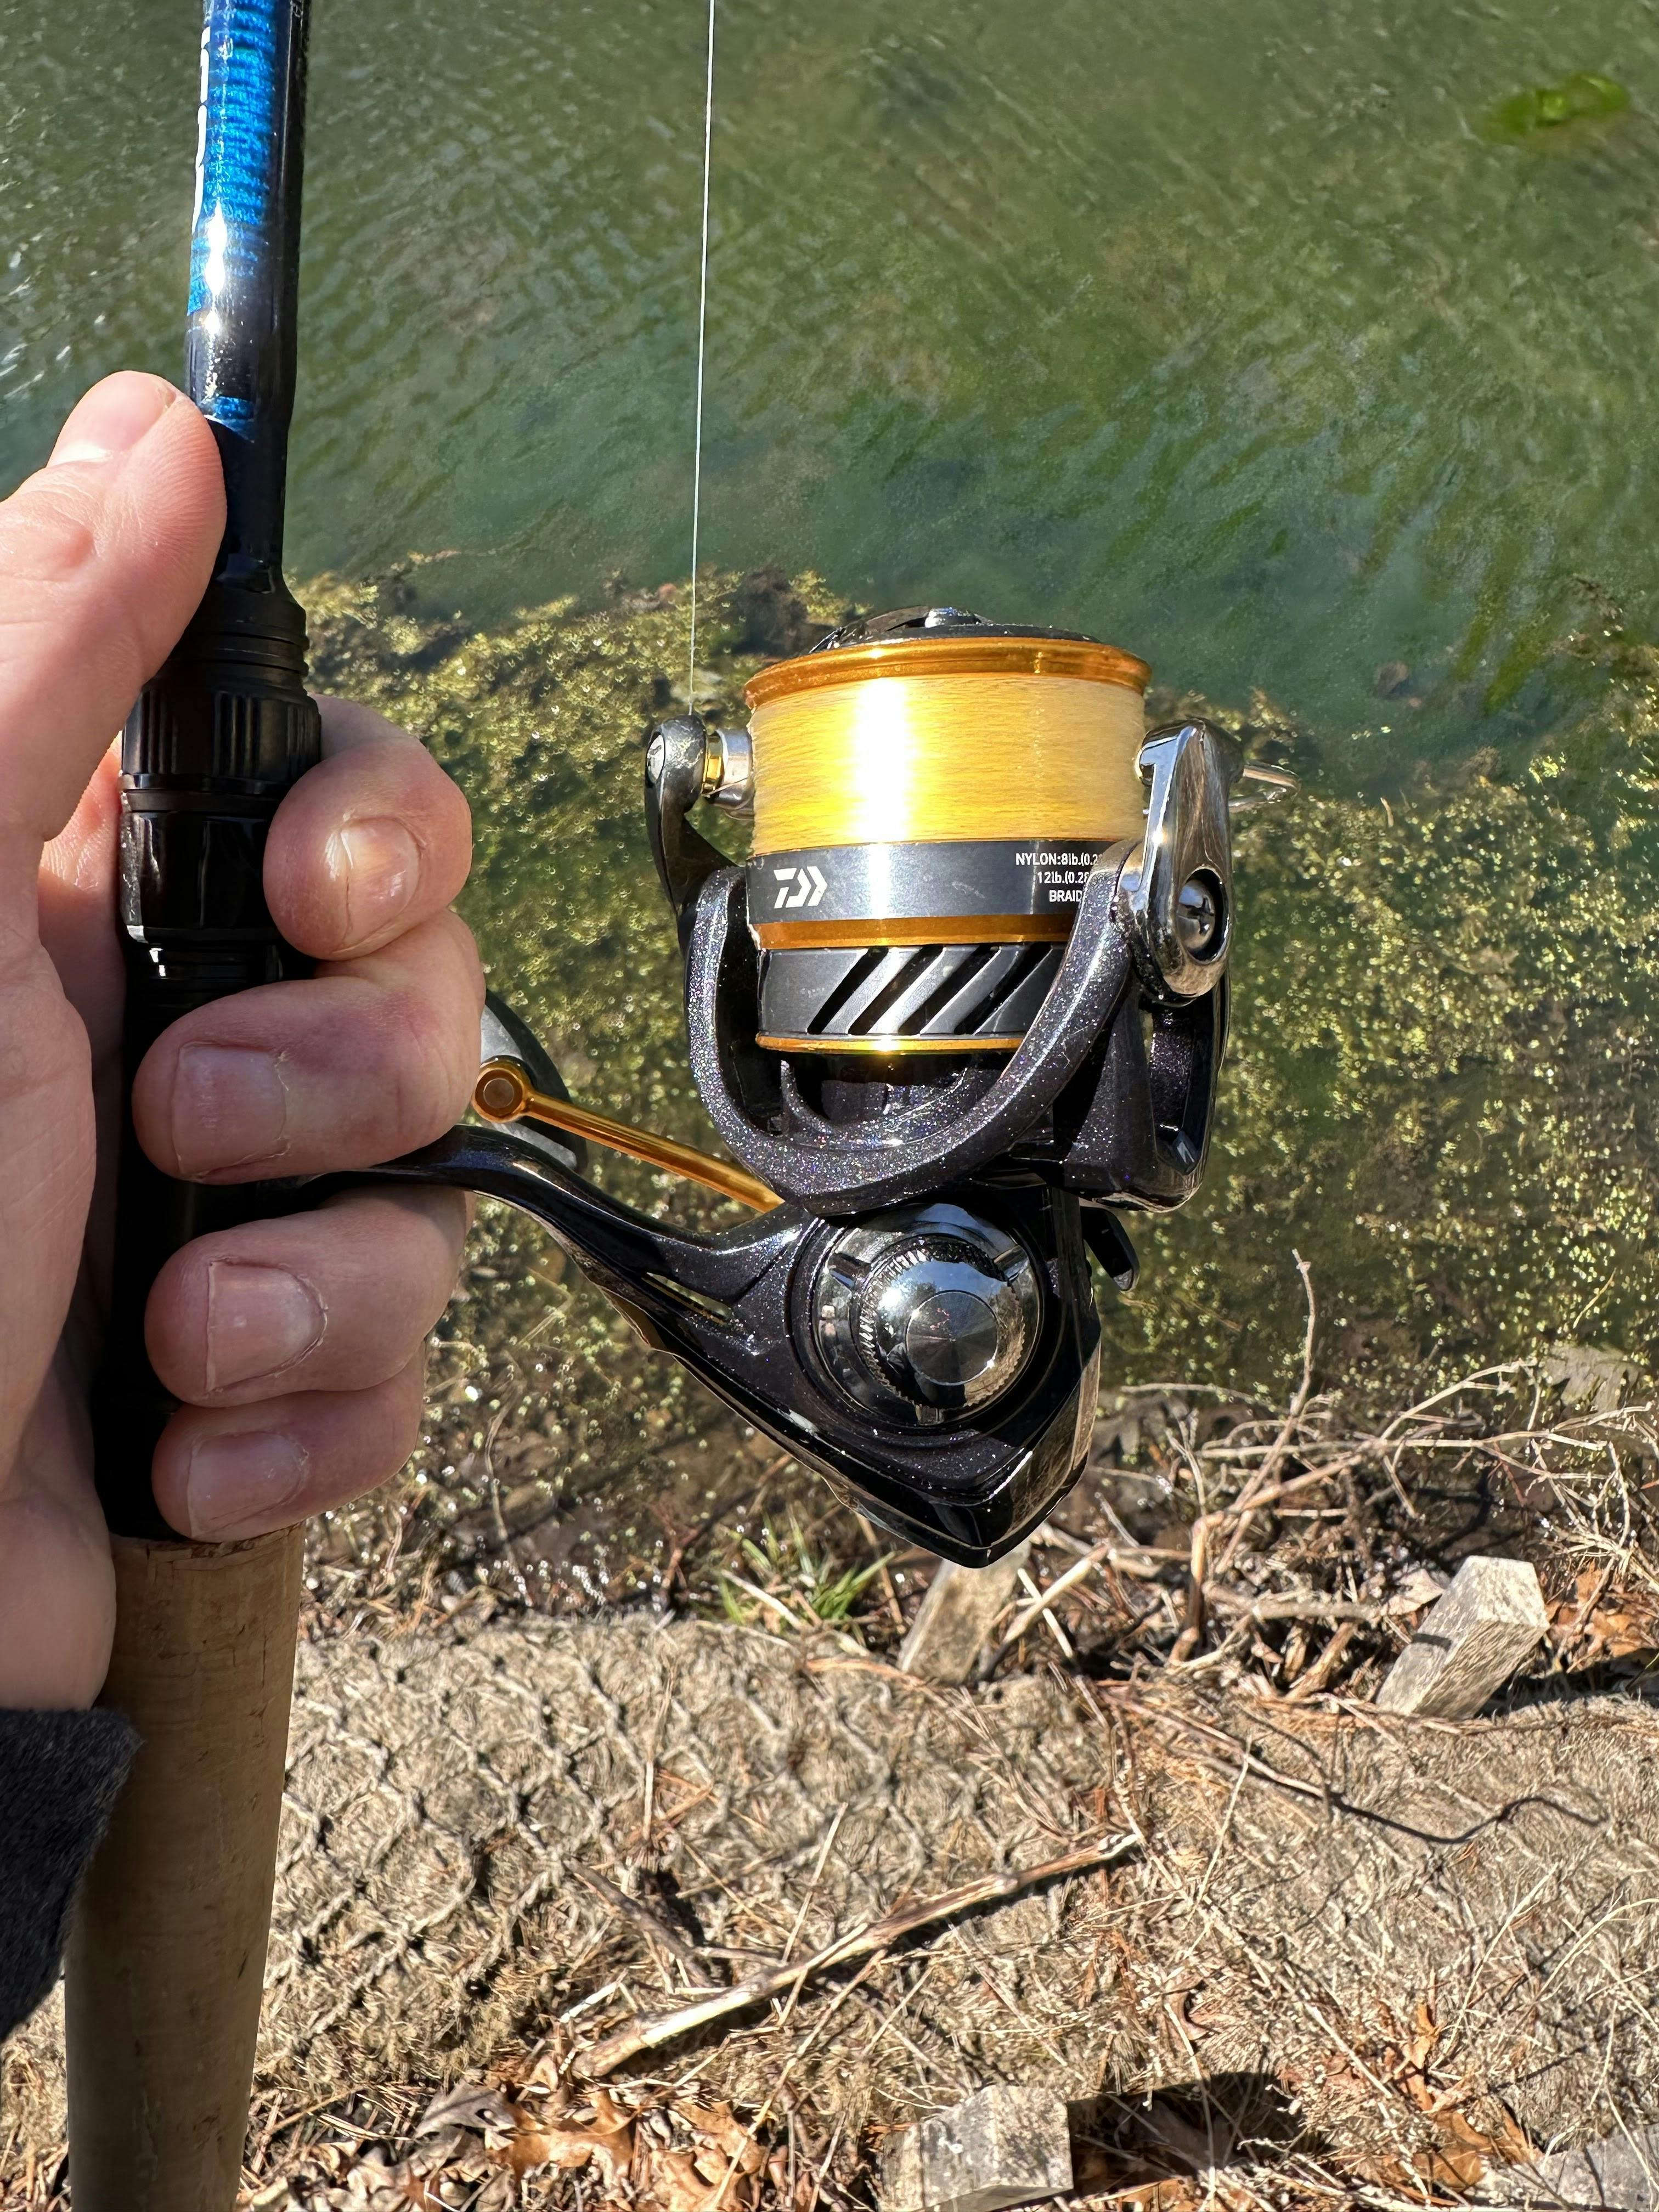 Best Freshwater Fishing Rod and Reel Combo in 2022 – Expert's